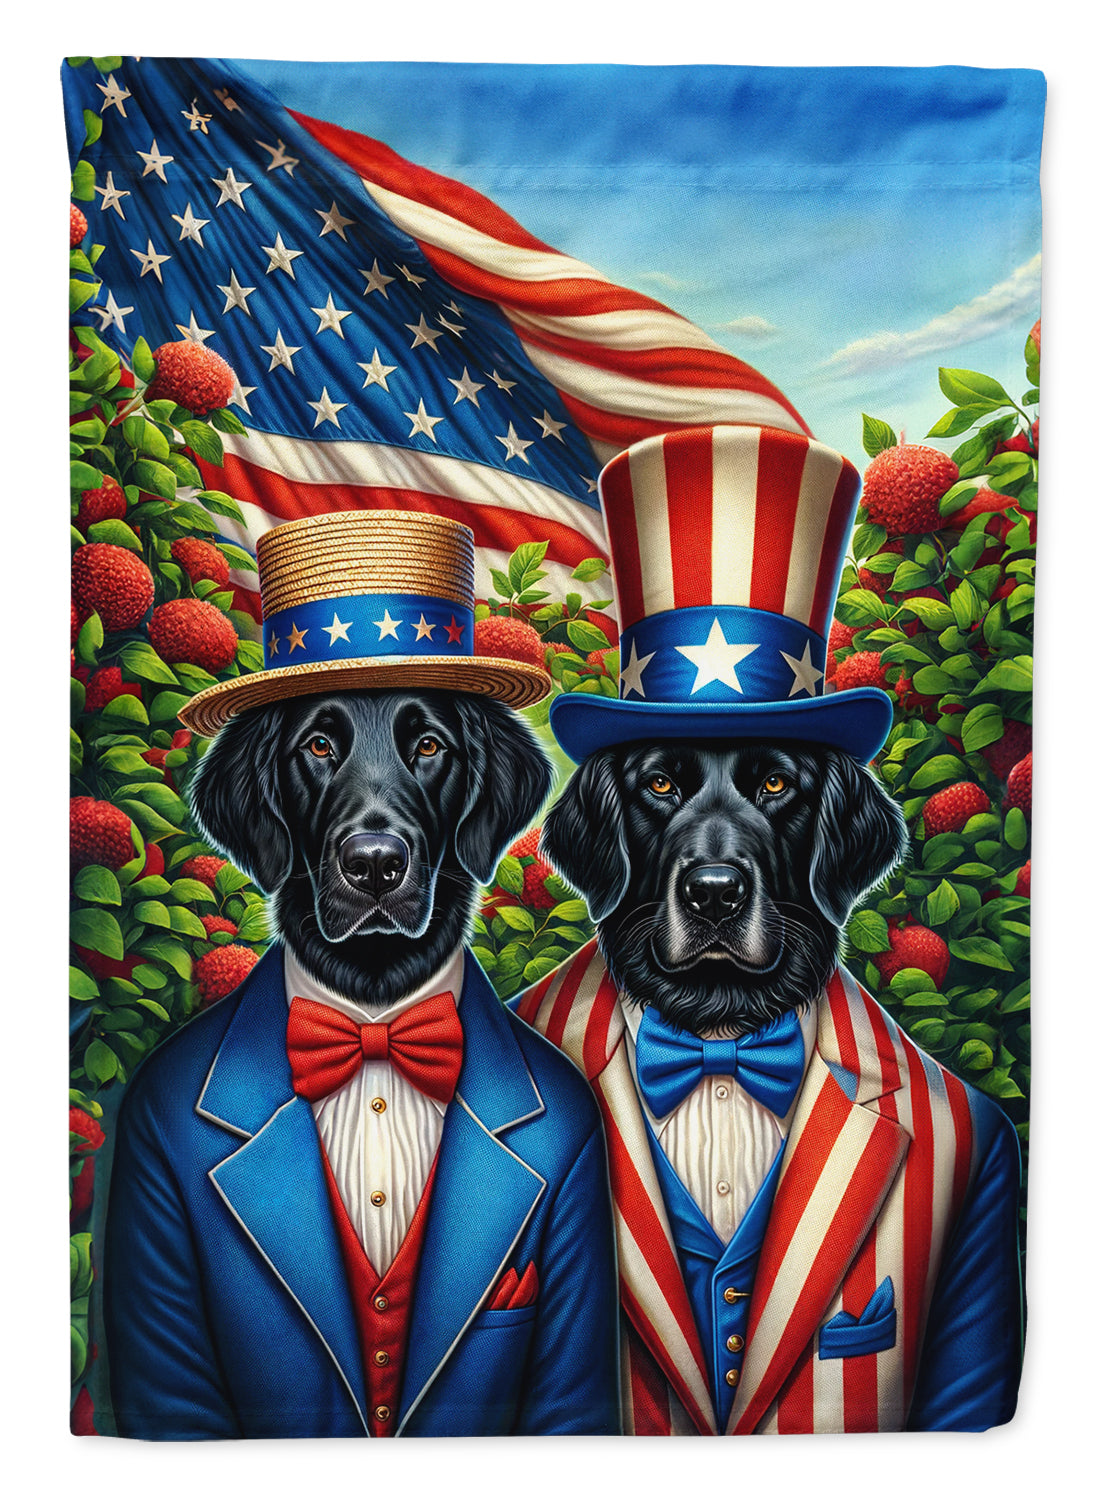 Buy this All American Flat-Coated Retriever Garden Flag